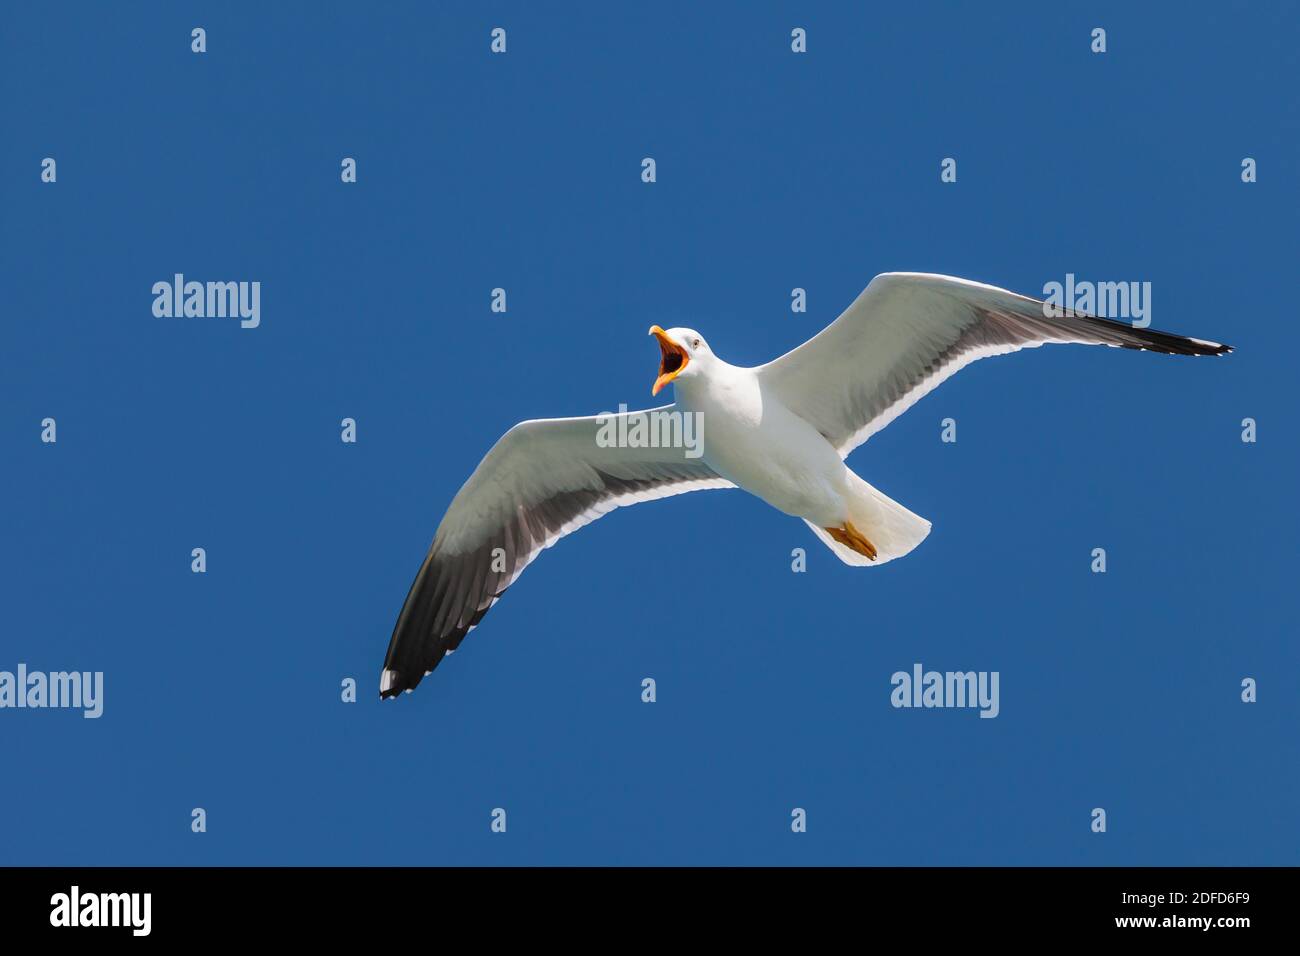 Screeching flying seagull in front of a deep blue sky Stock Photo